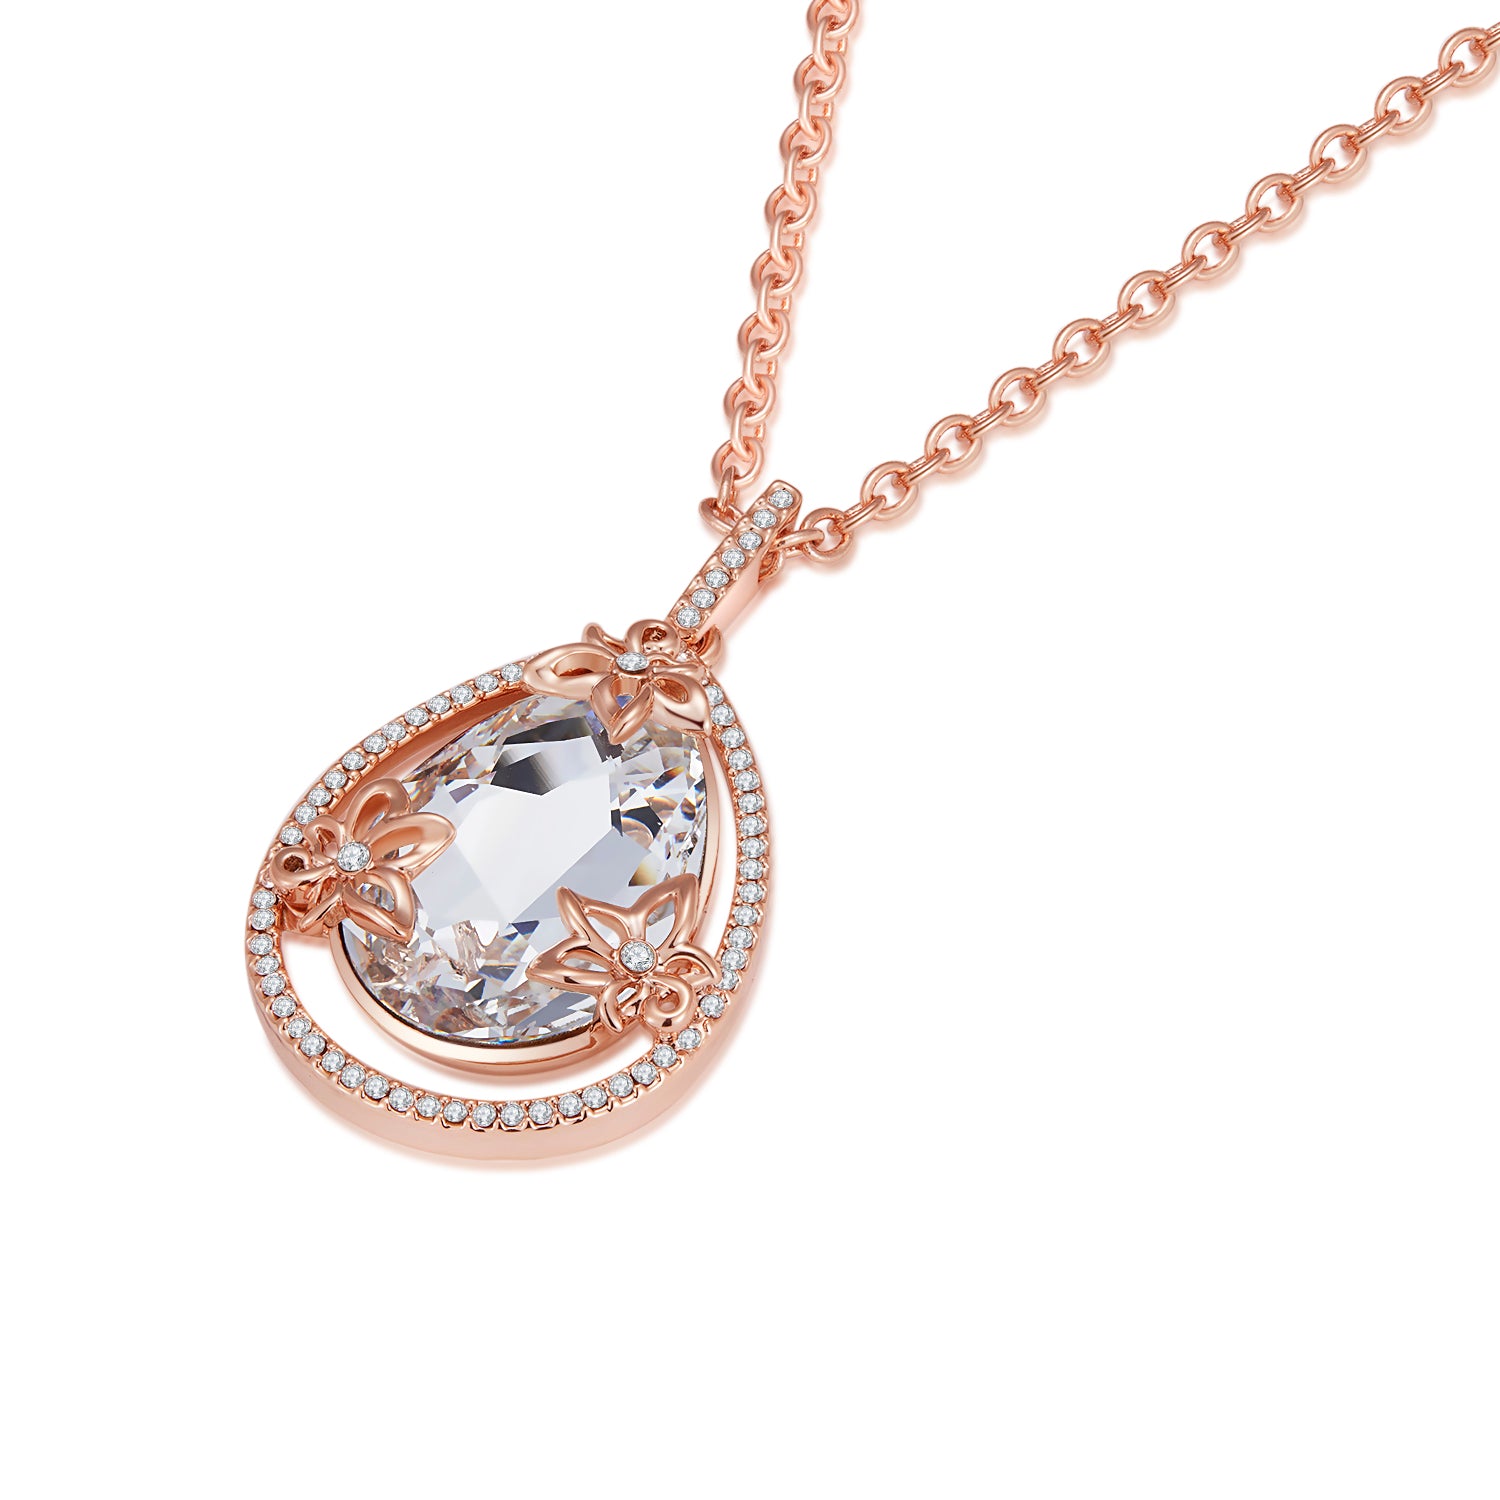 Rose gold VICACCI Mermaid tears Pendant necklace